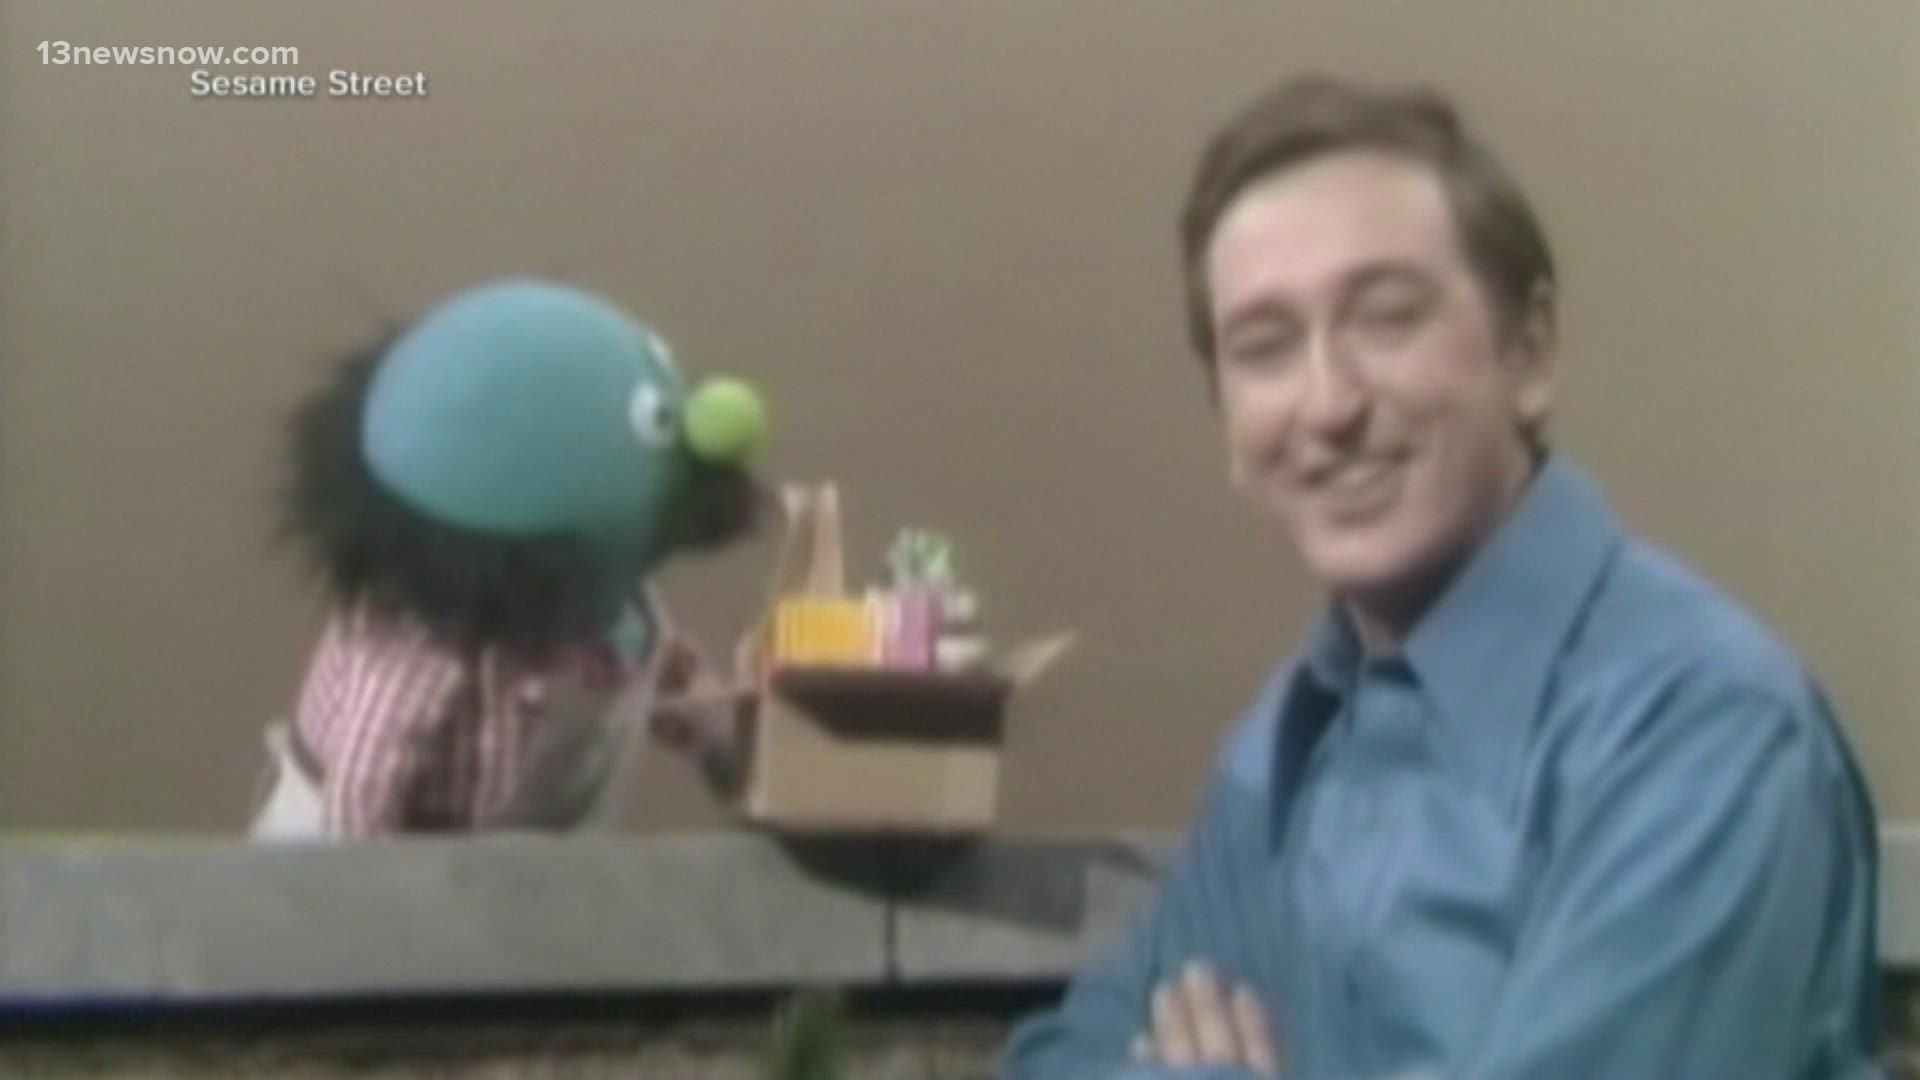 He was one of the only non puppet cast members of Sesame Street.